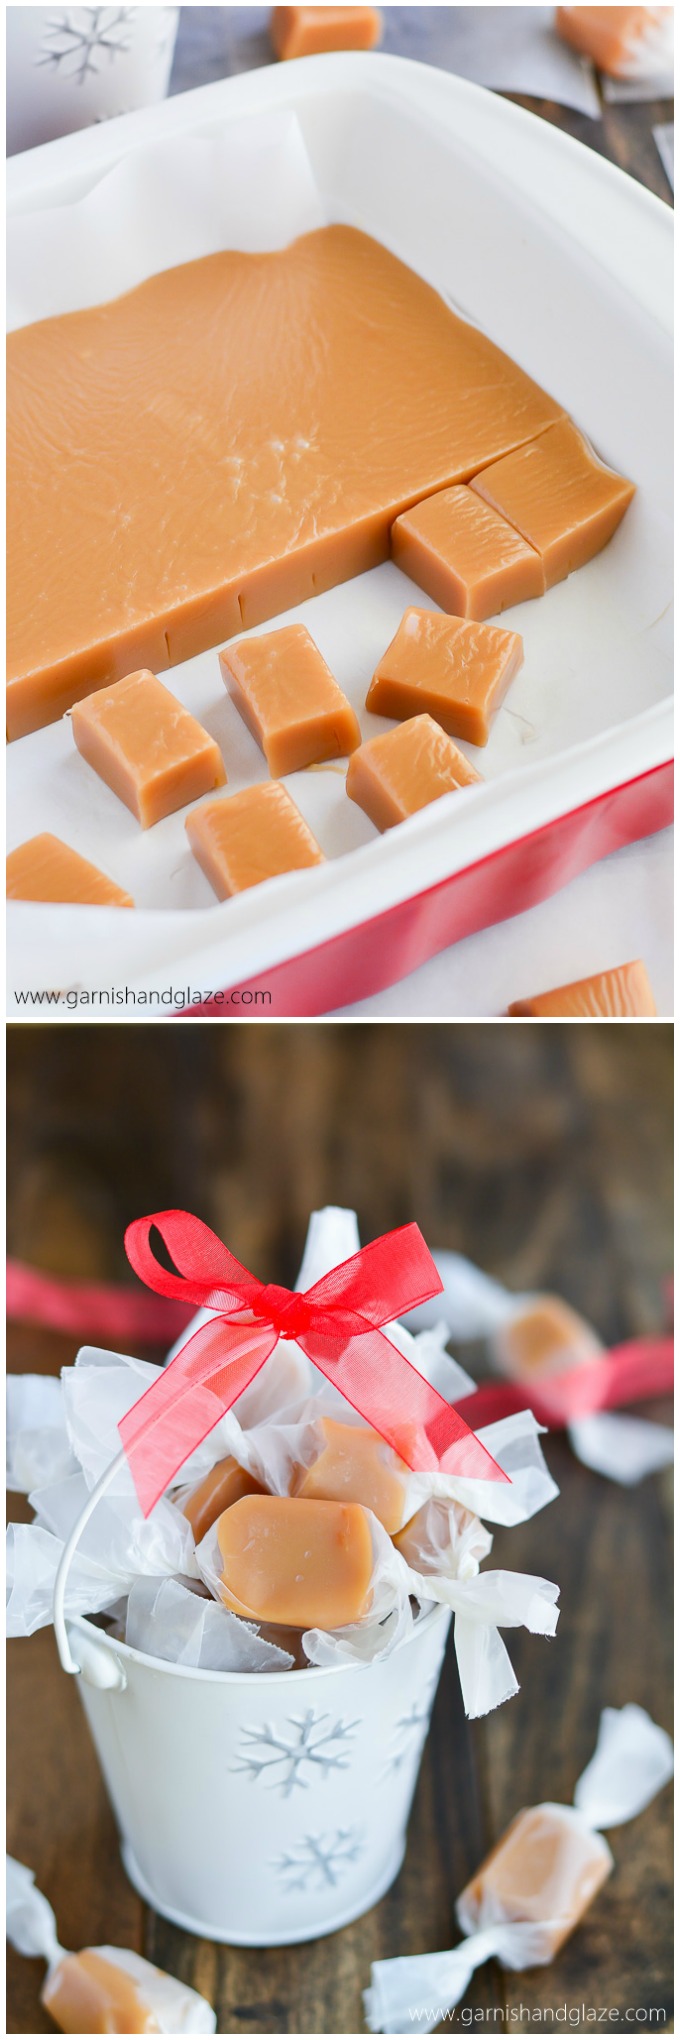 Soft, buttery, melt-in-your-mouth homemade Christmas caramels are the perfect holiday gift!